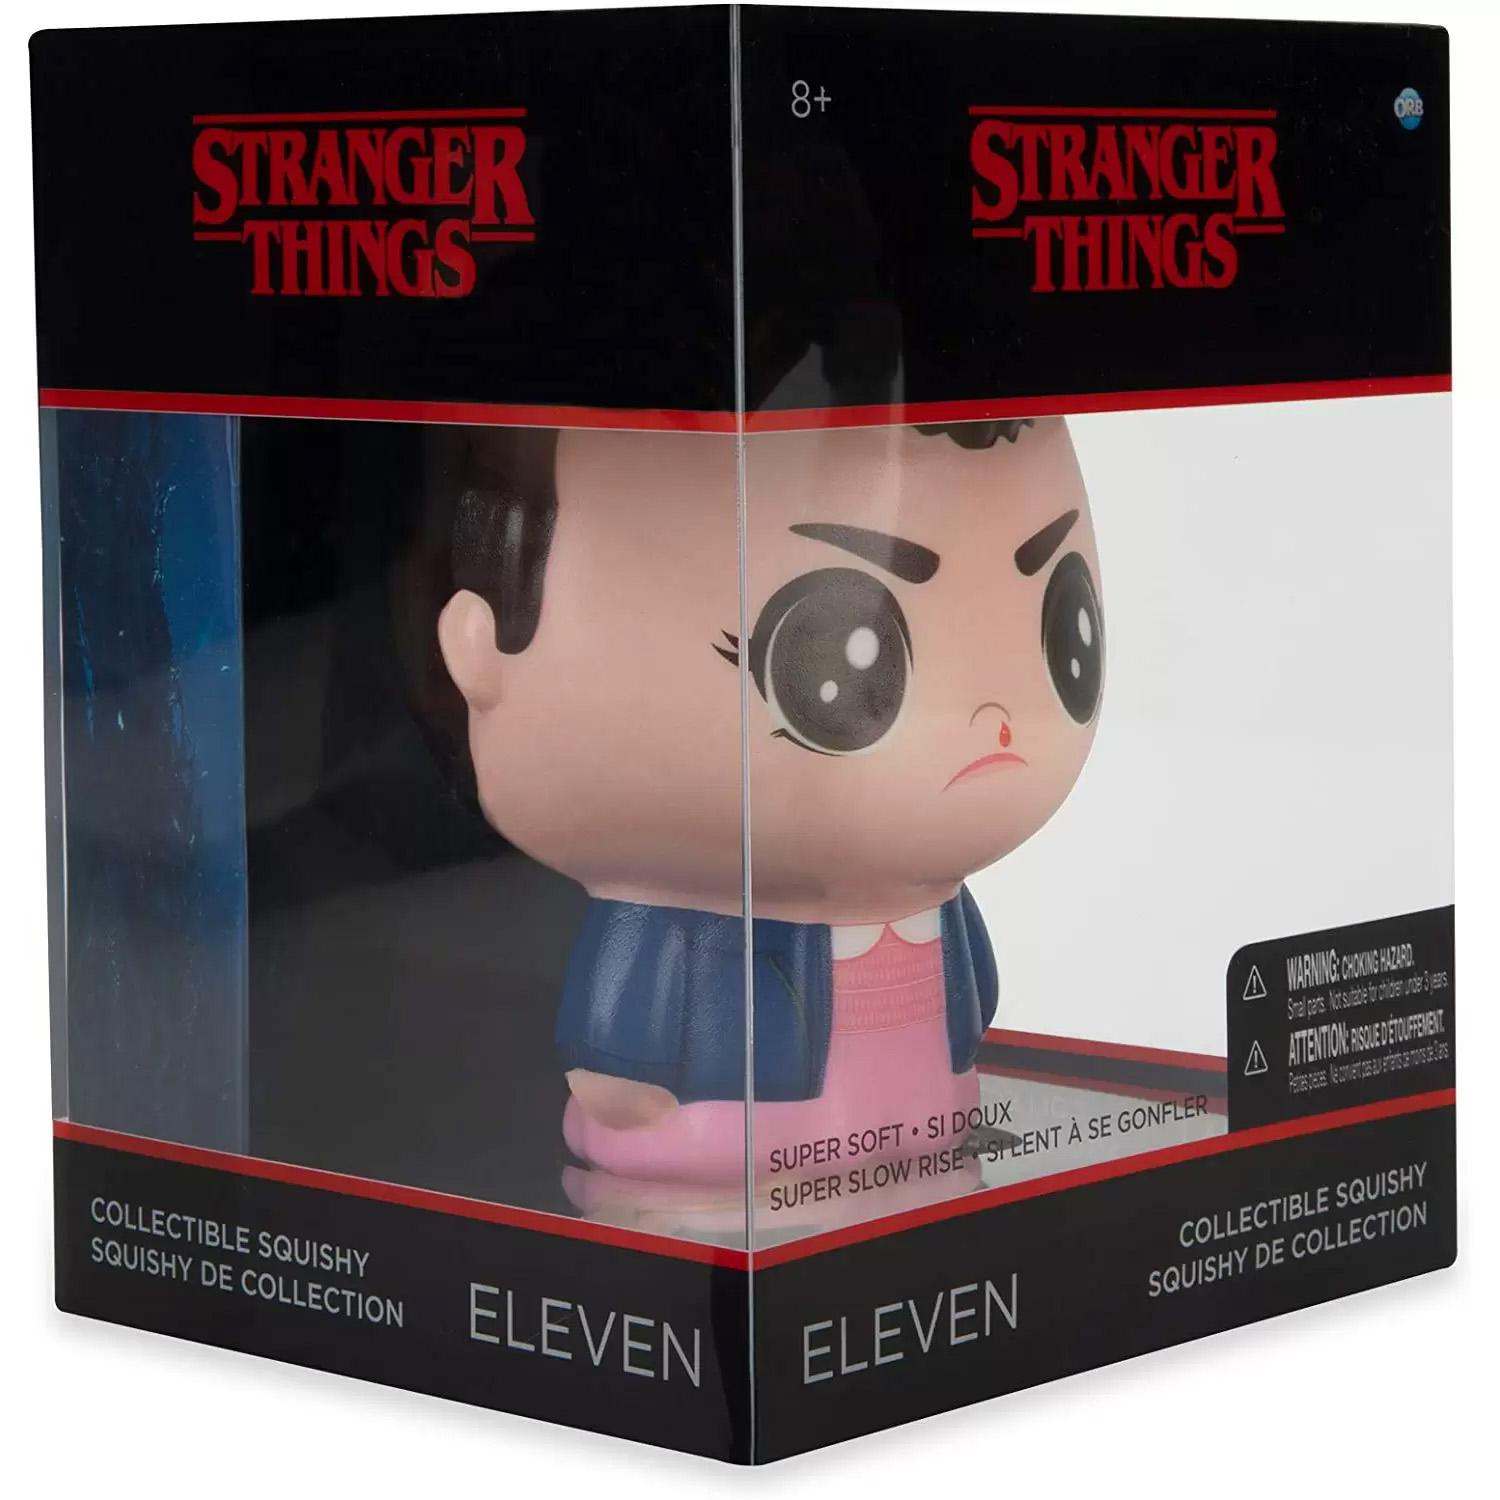 Stranger Things Squishies for $3.48